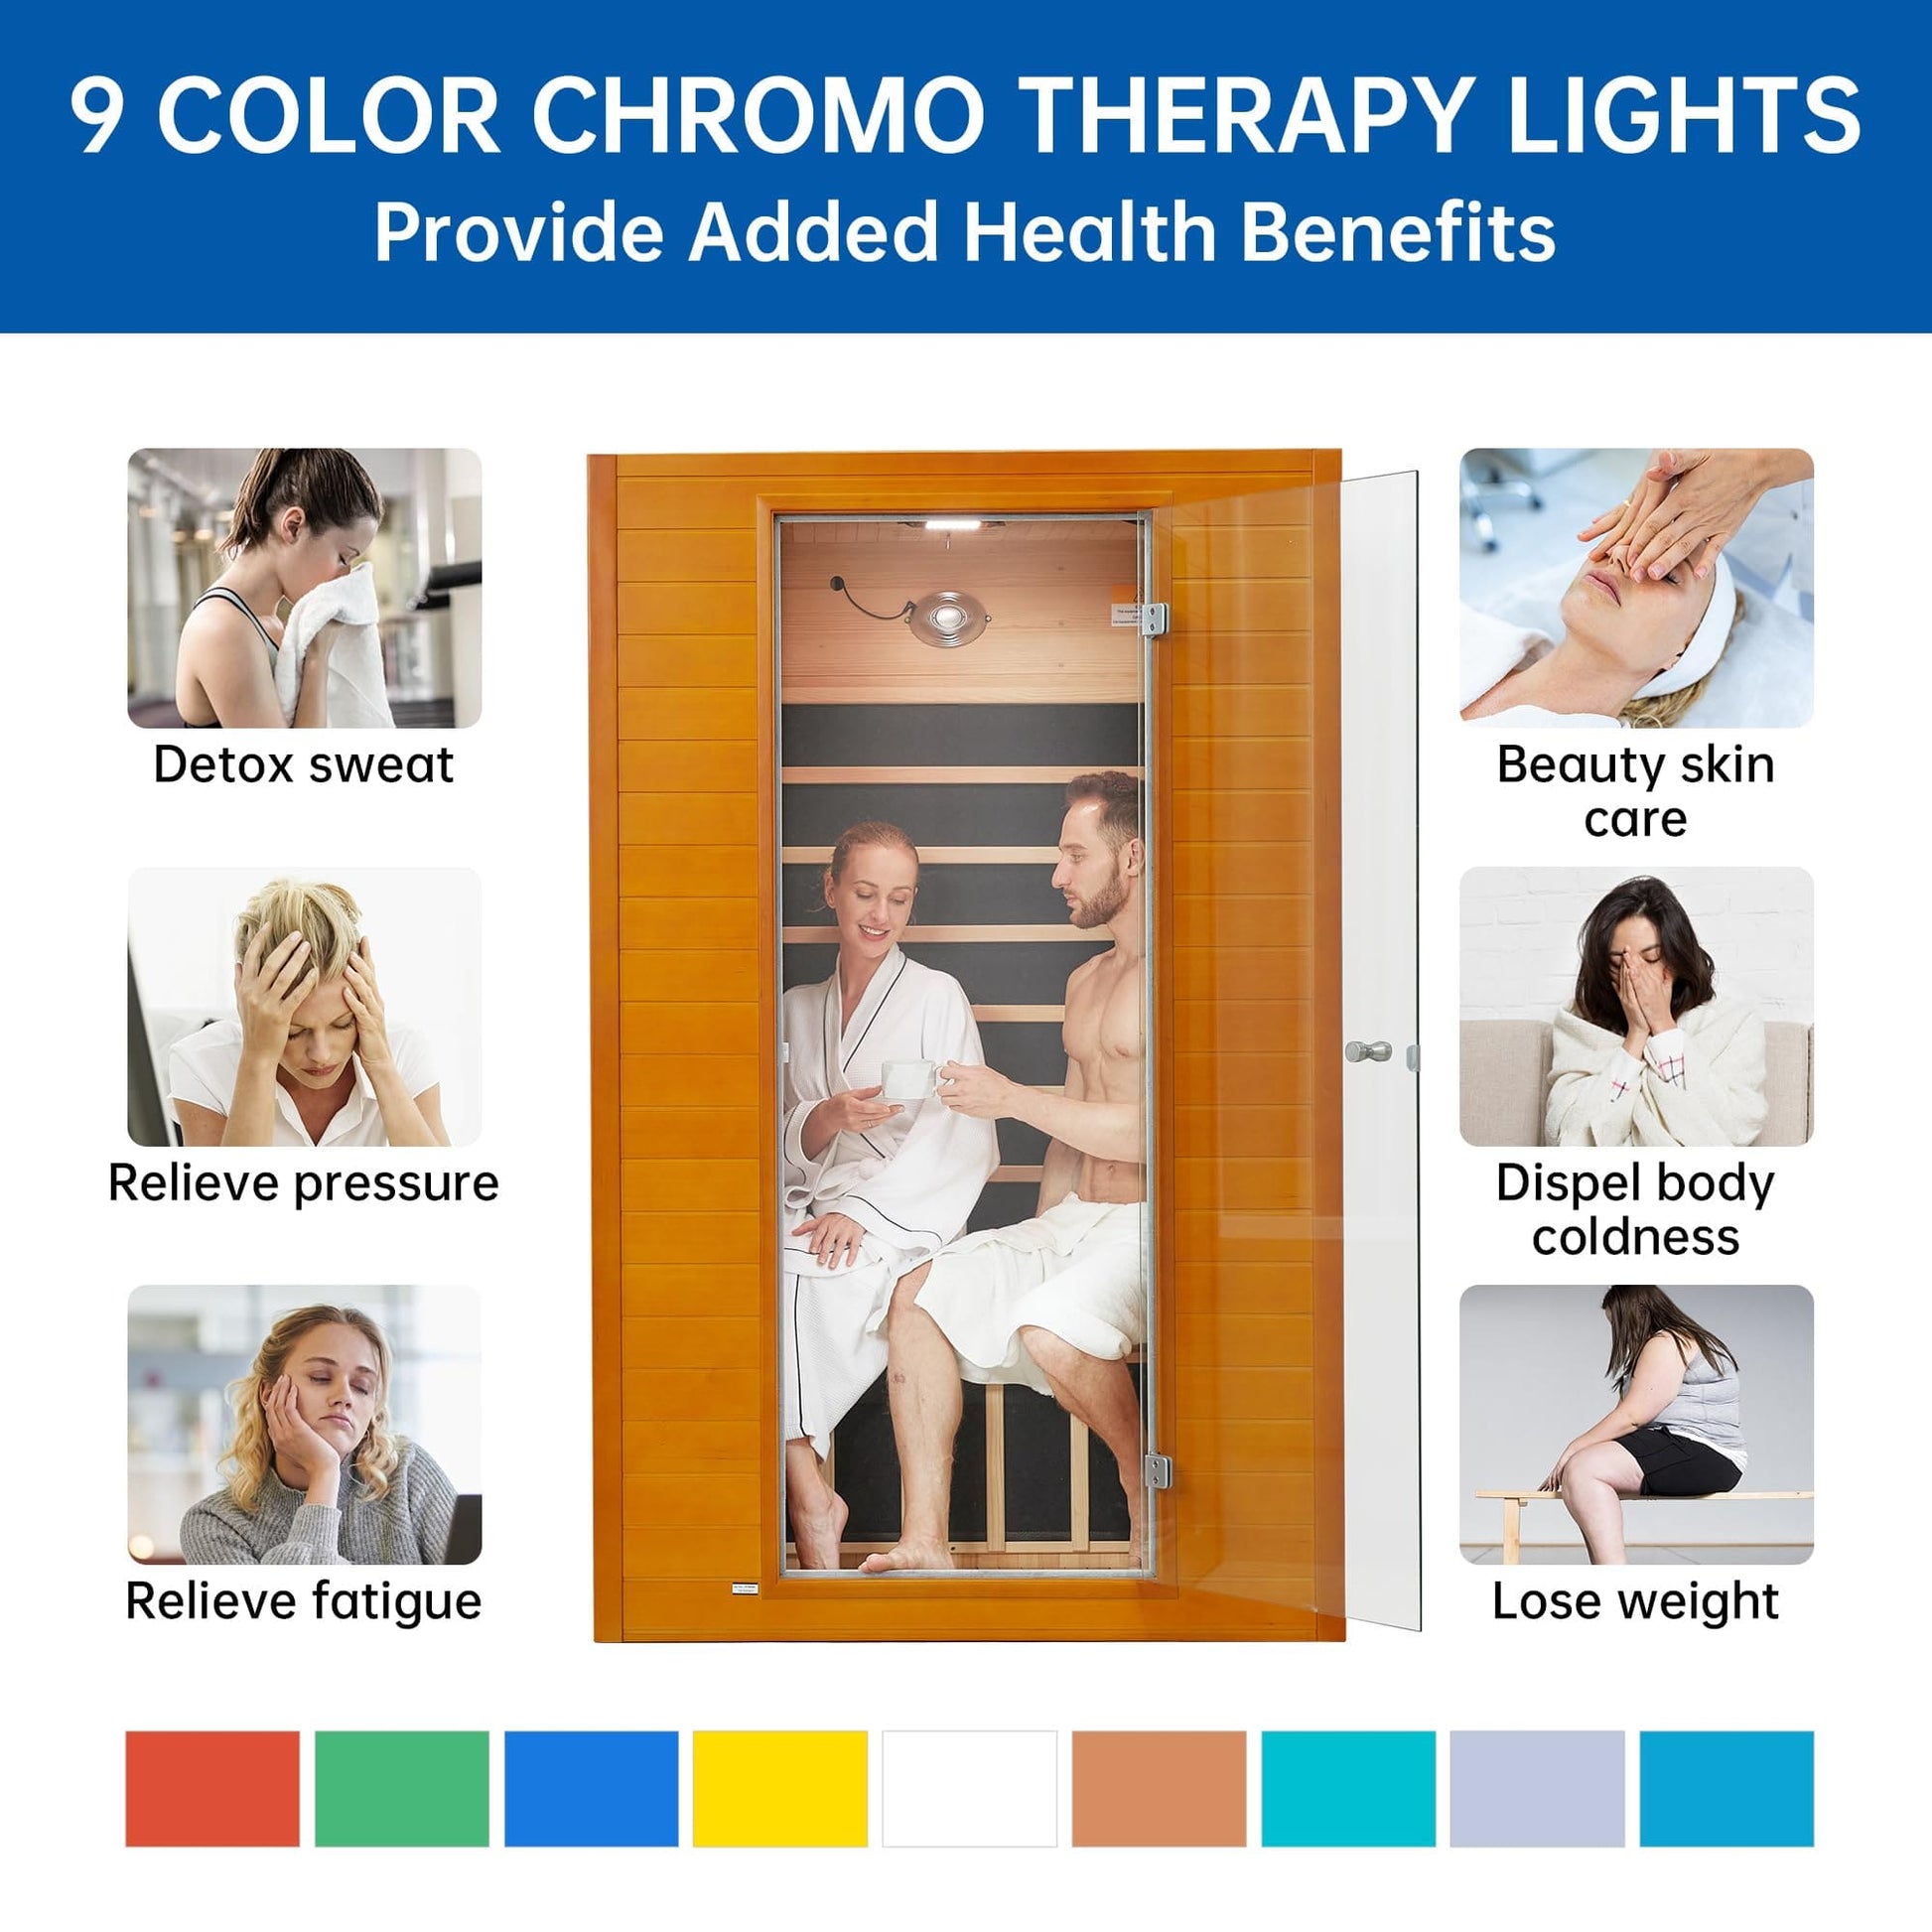 RESTISLAND MASSAGERS Canadian Hemlock Wood Far Infrared Sauna Room of Near Zreo EMF, 9 Chromo Therapy Lights, Oxygen Ionizer for Home and Indoor Use, with Bluetooth, LCD Control Pannel